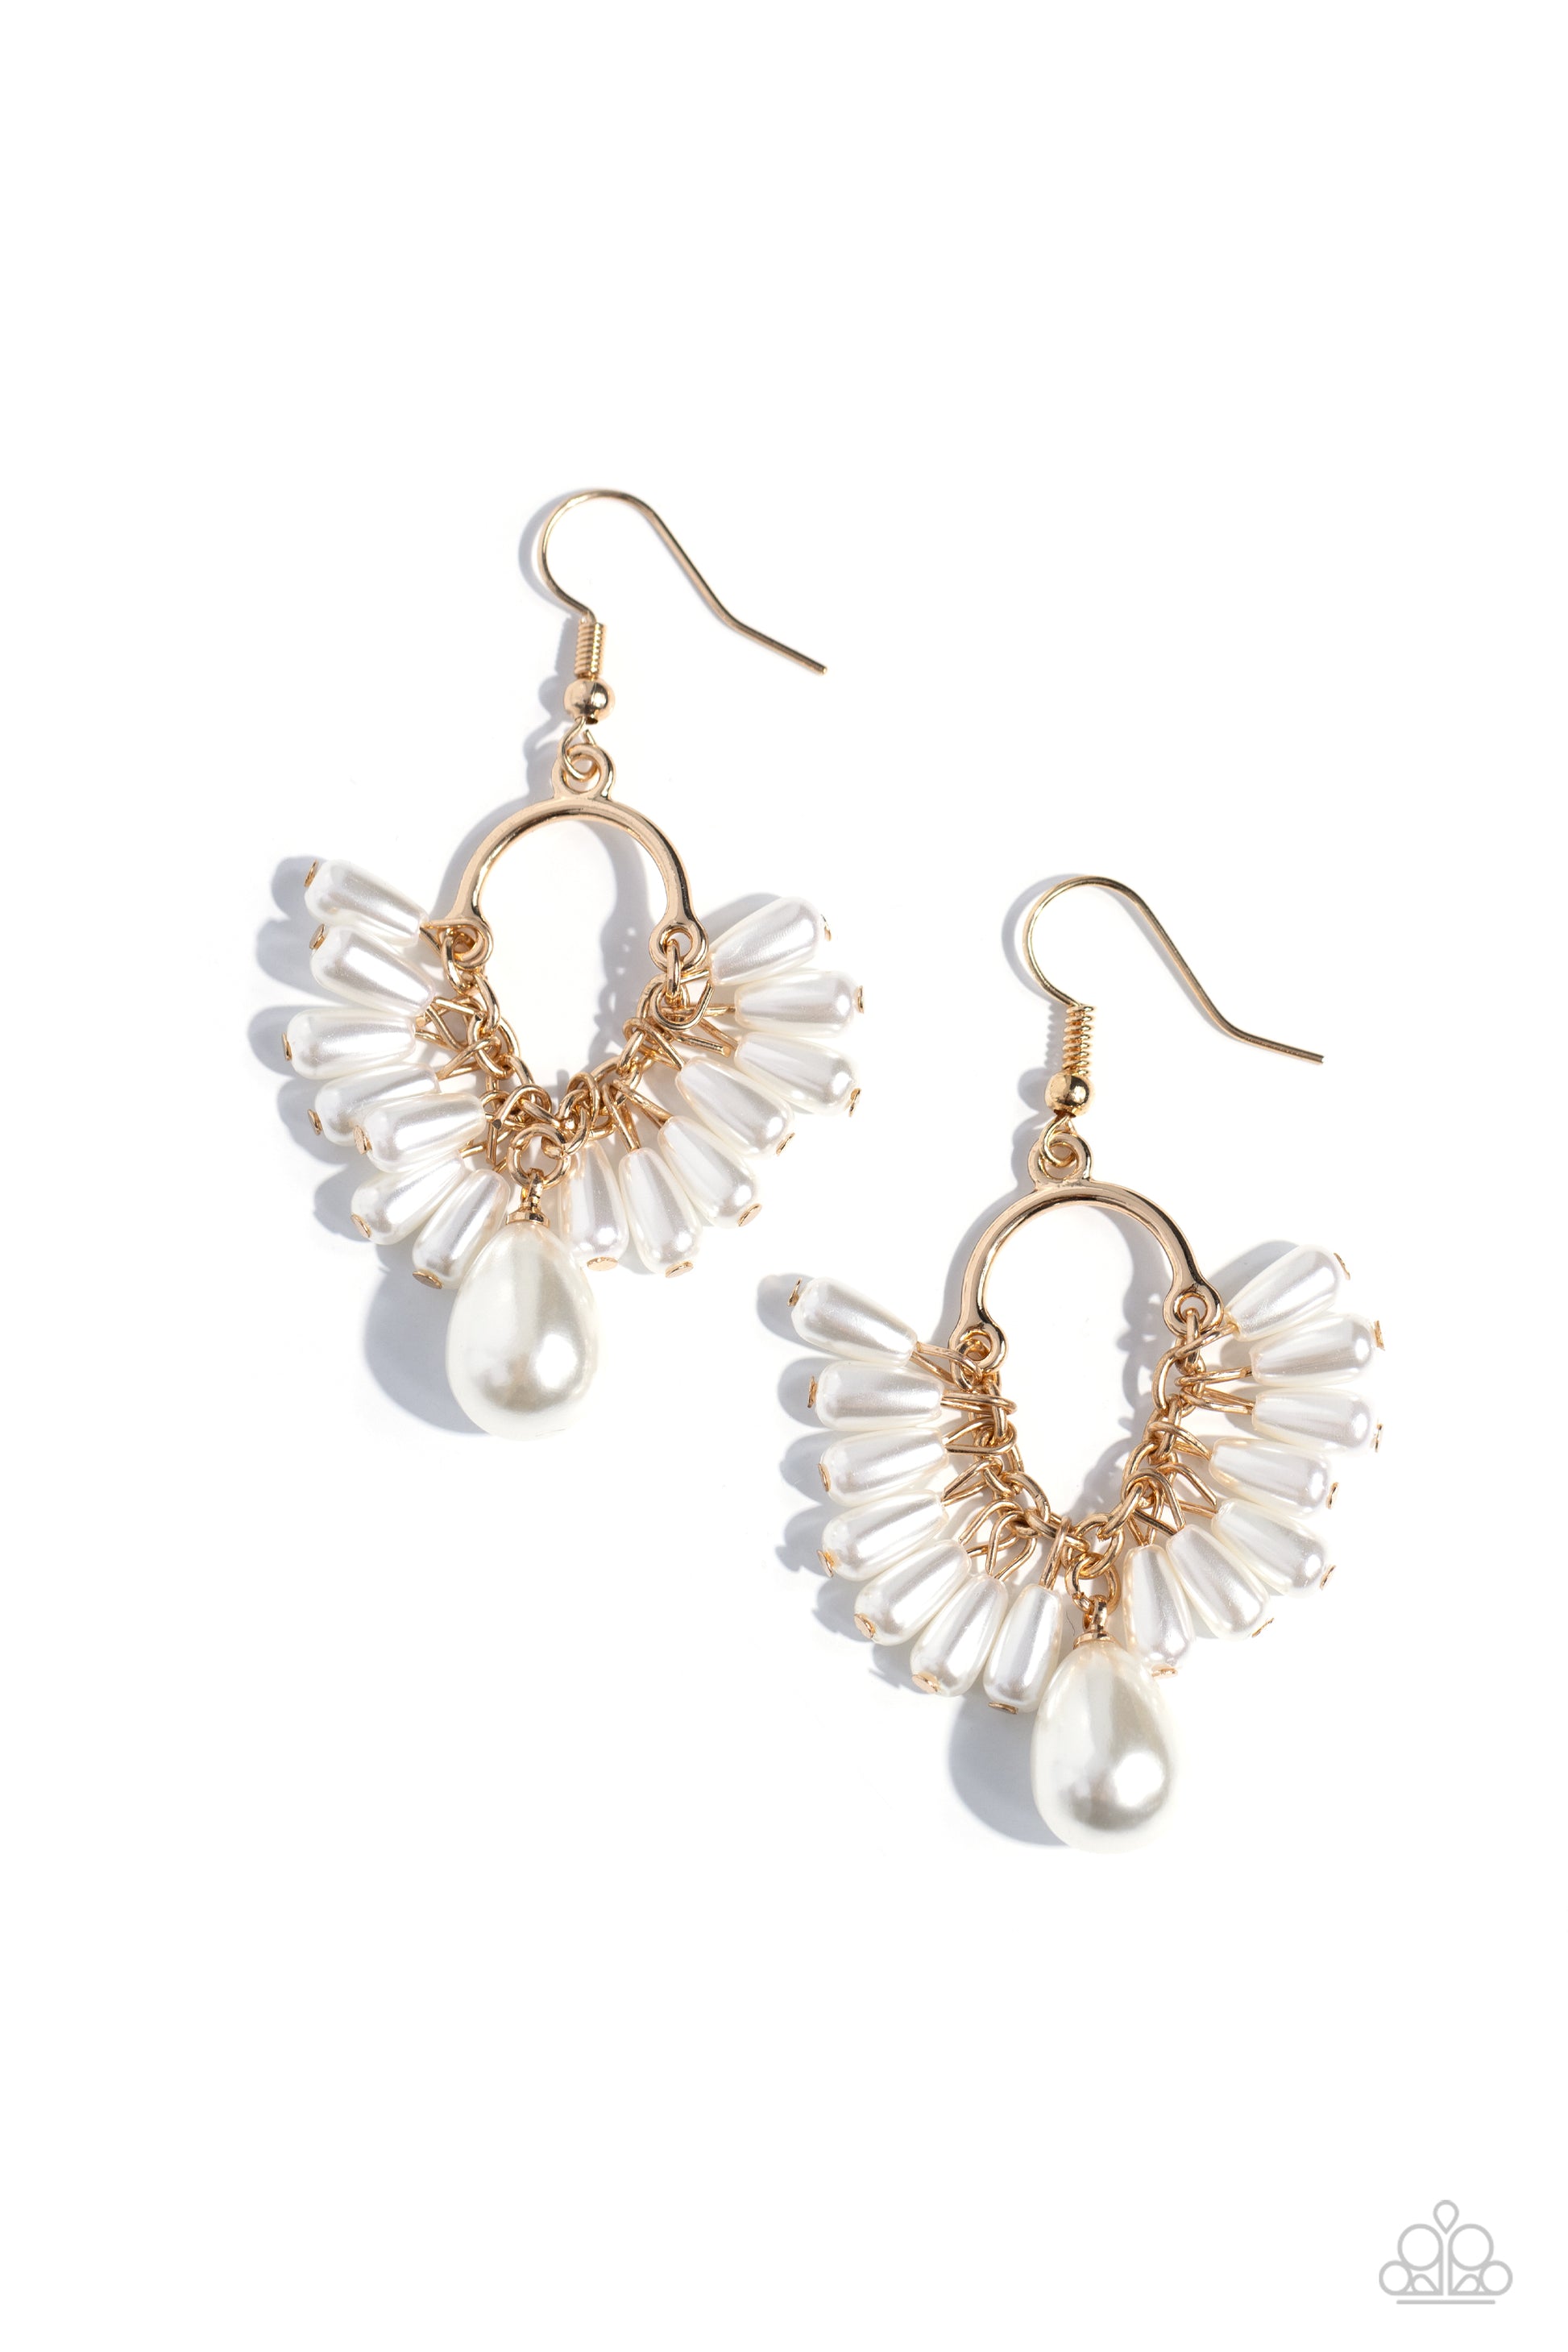 Paparazzi Ahoy There! Gold and Pearl Earrings. Subscribe & Save. #P5RE-GDXX-266XX. Fringe earring